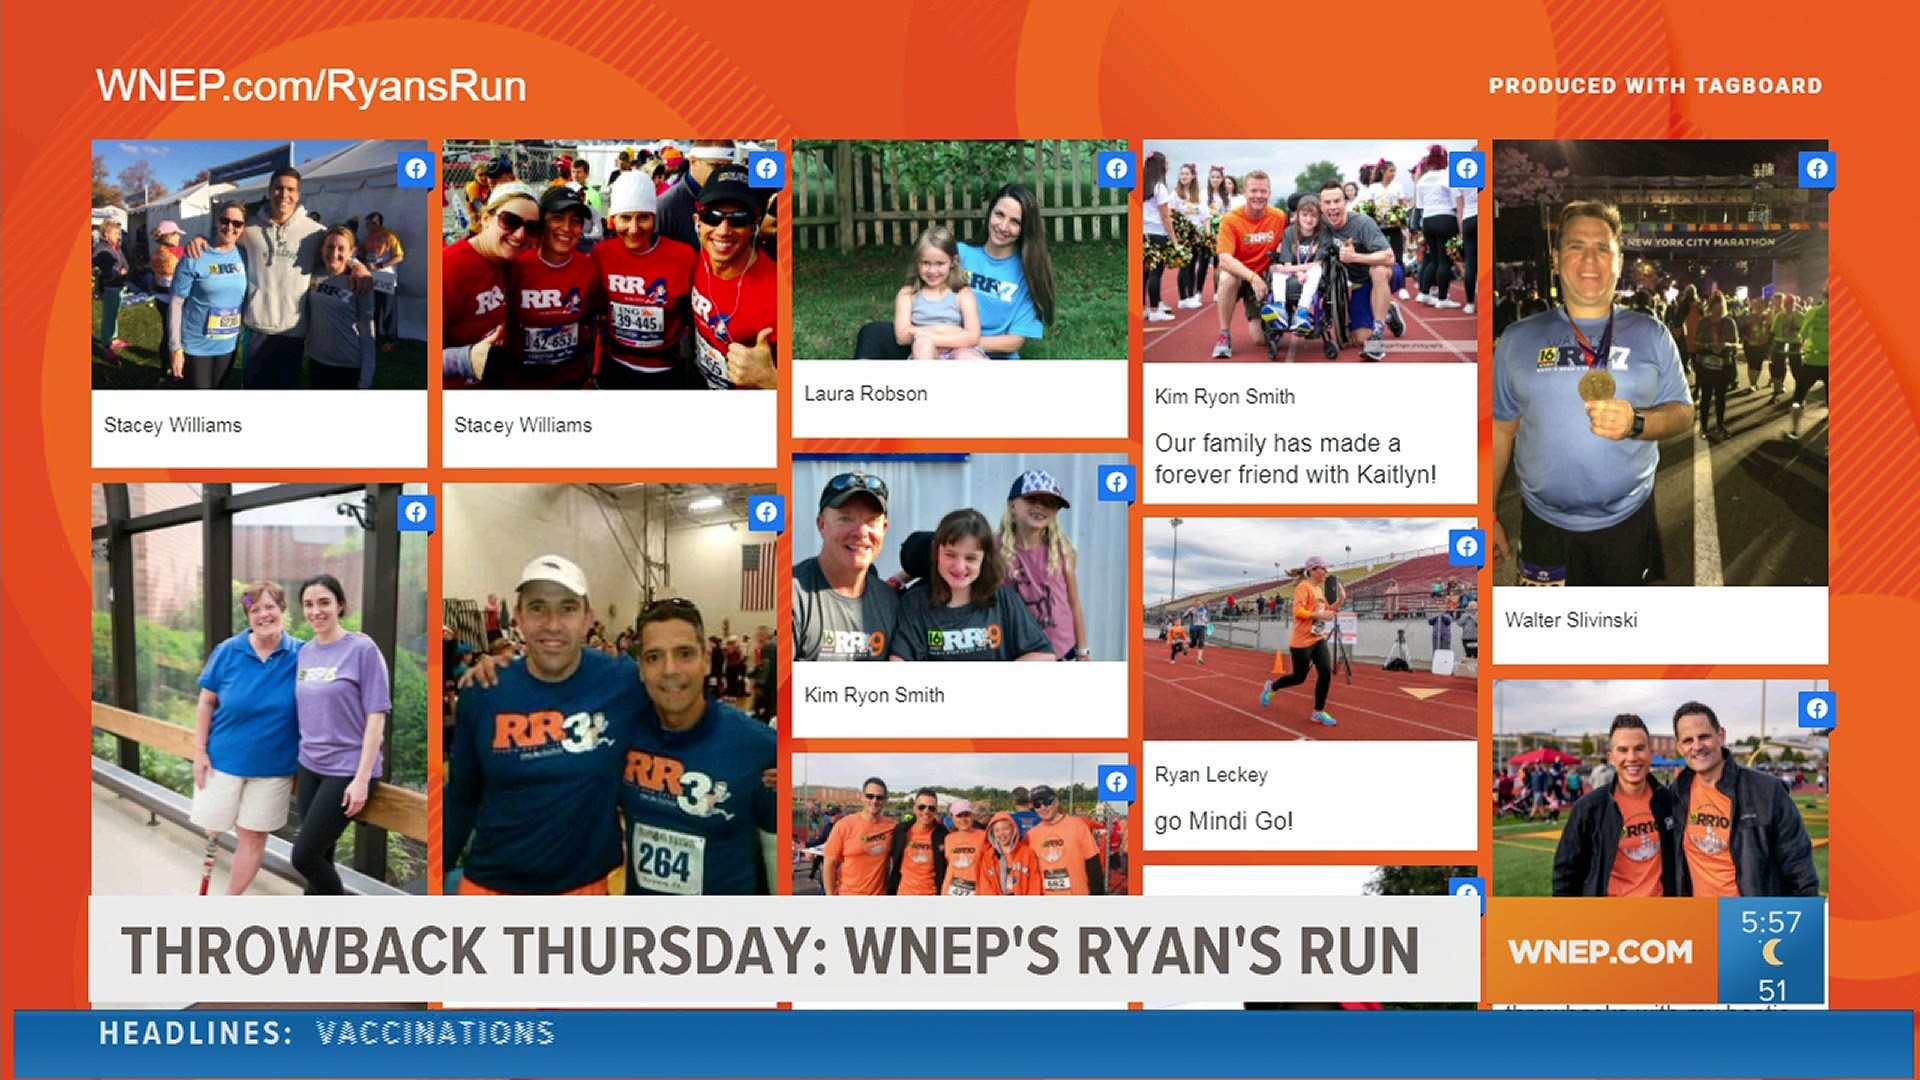 If you ever wanted to run the world's biggest marathon in the Big Apple, now is your chance!  WNEP's Ryan's Run has limited spots available for new team members.